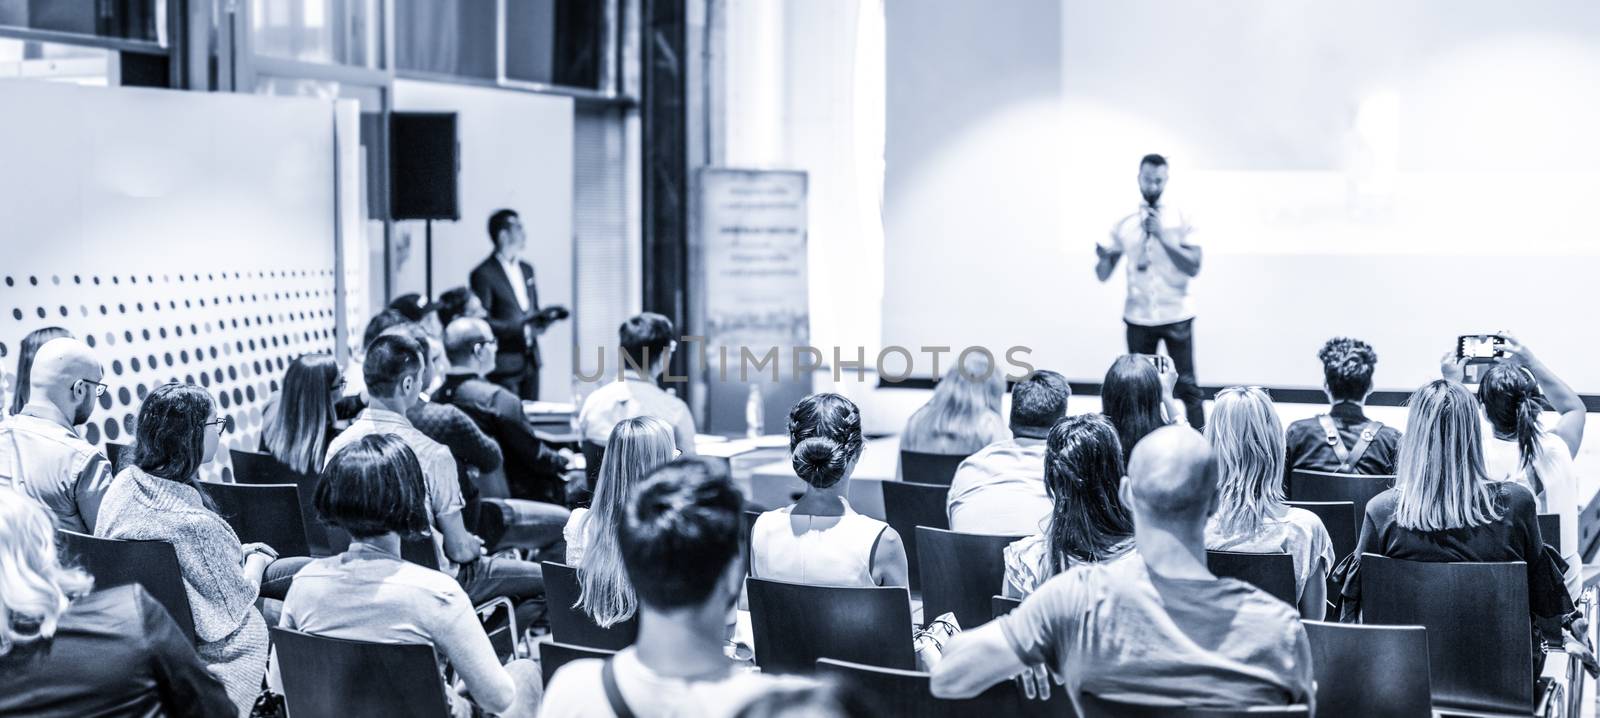 Male speaker giving a talk in conference hall at business event. Audience at the conference hall. Business and Entrepreneurship concept. Focus on unrecognizable people in audience. Blue toned.